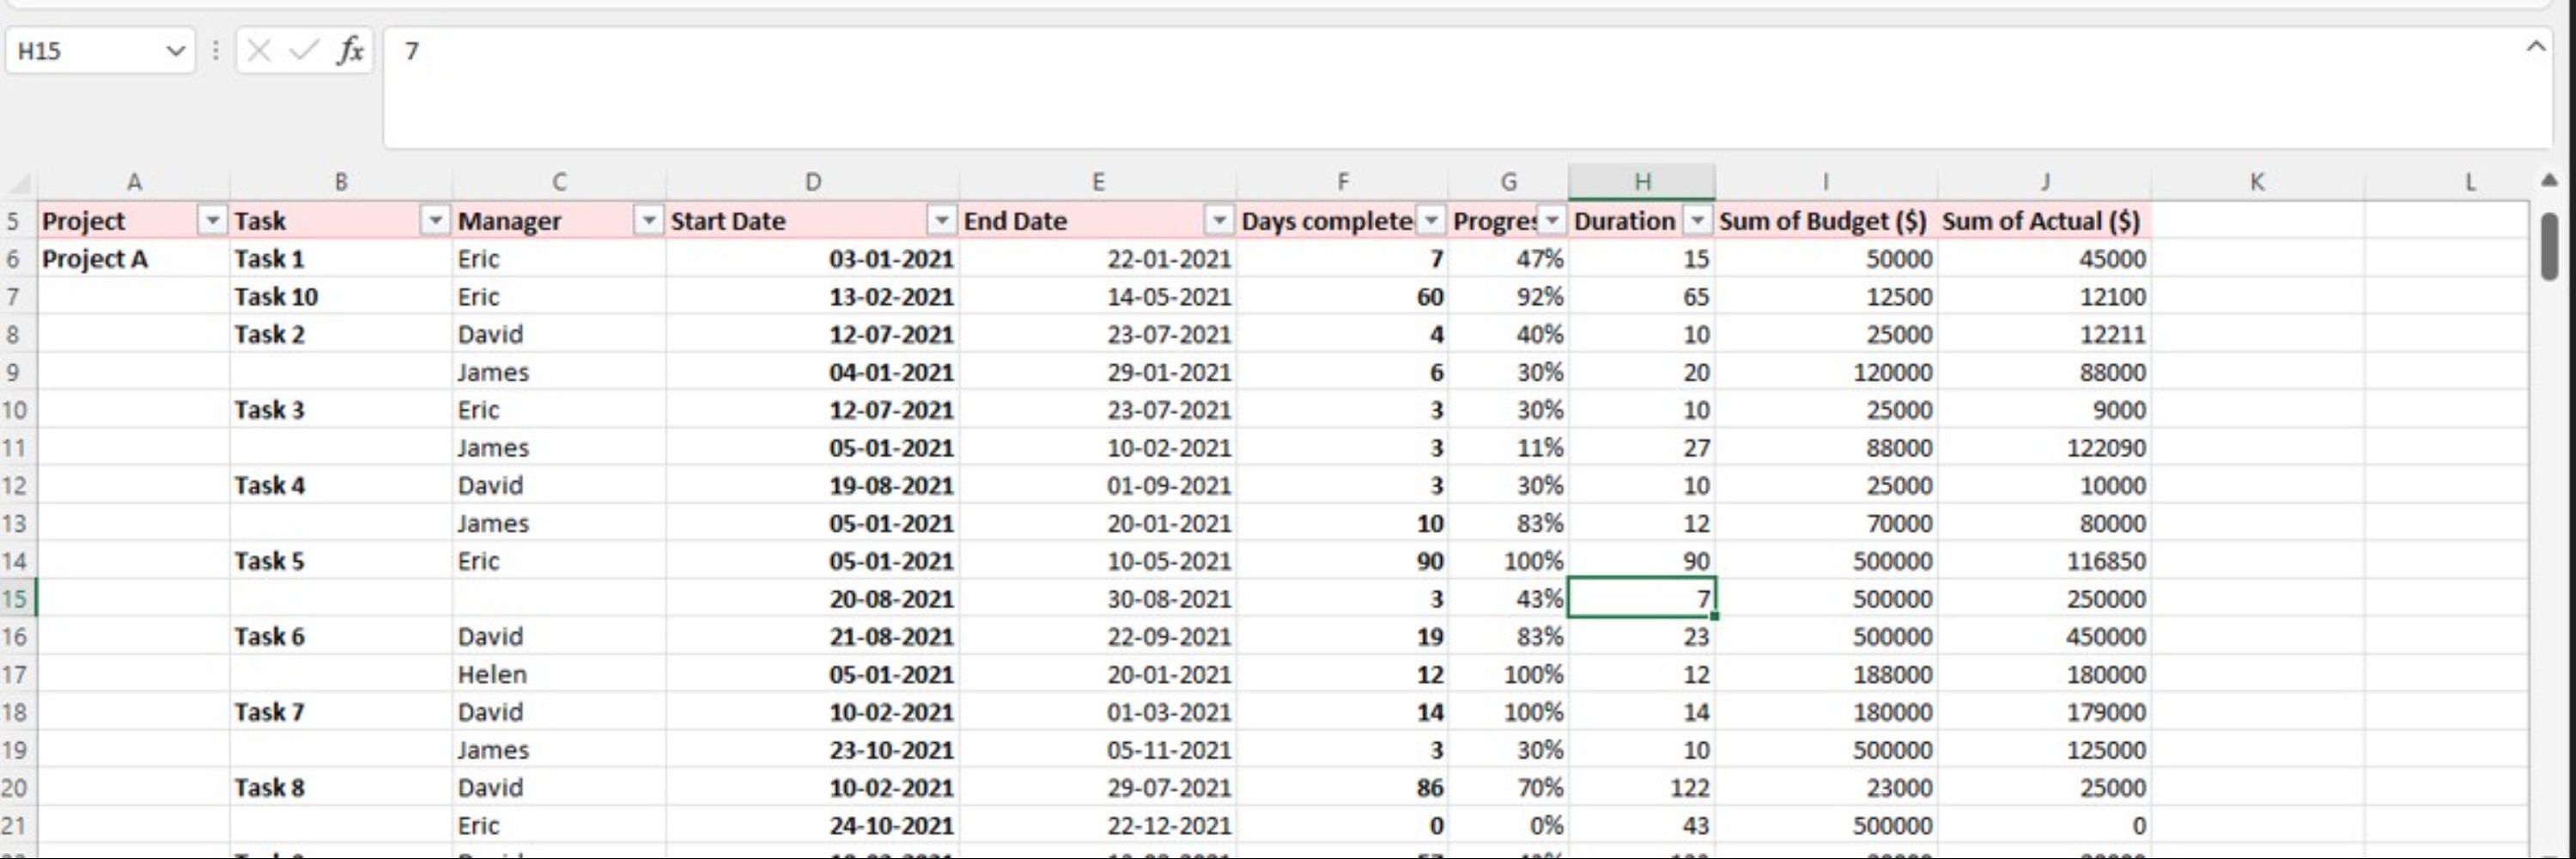 Arranging data in a PivotTable